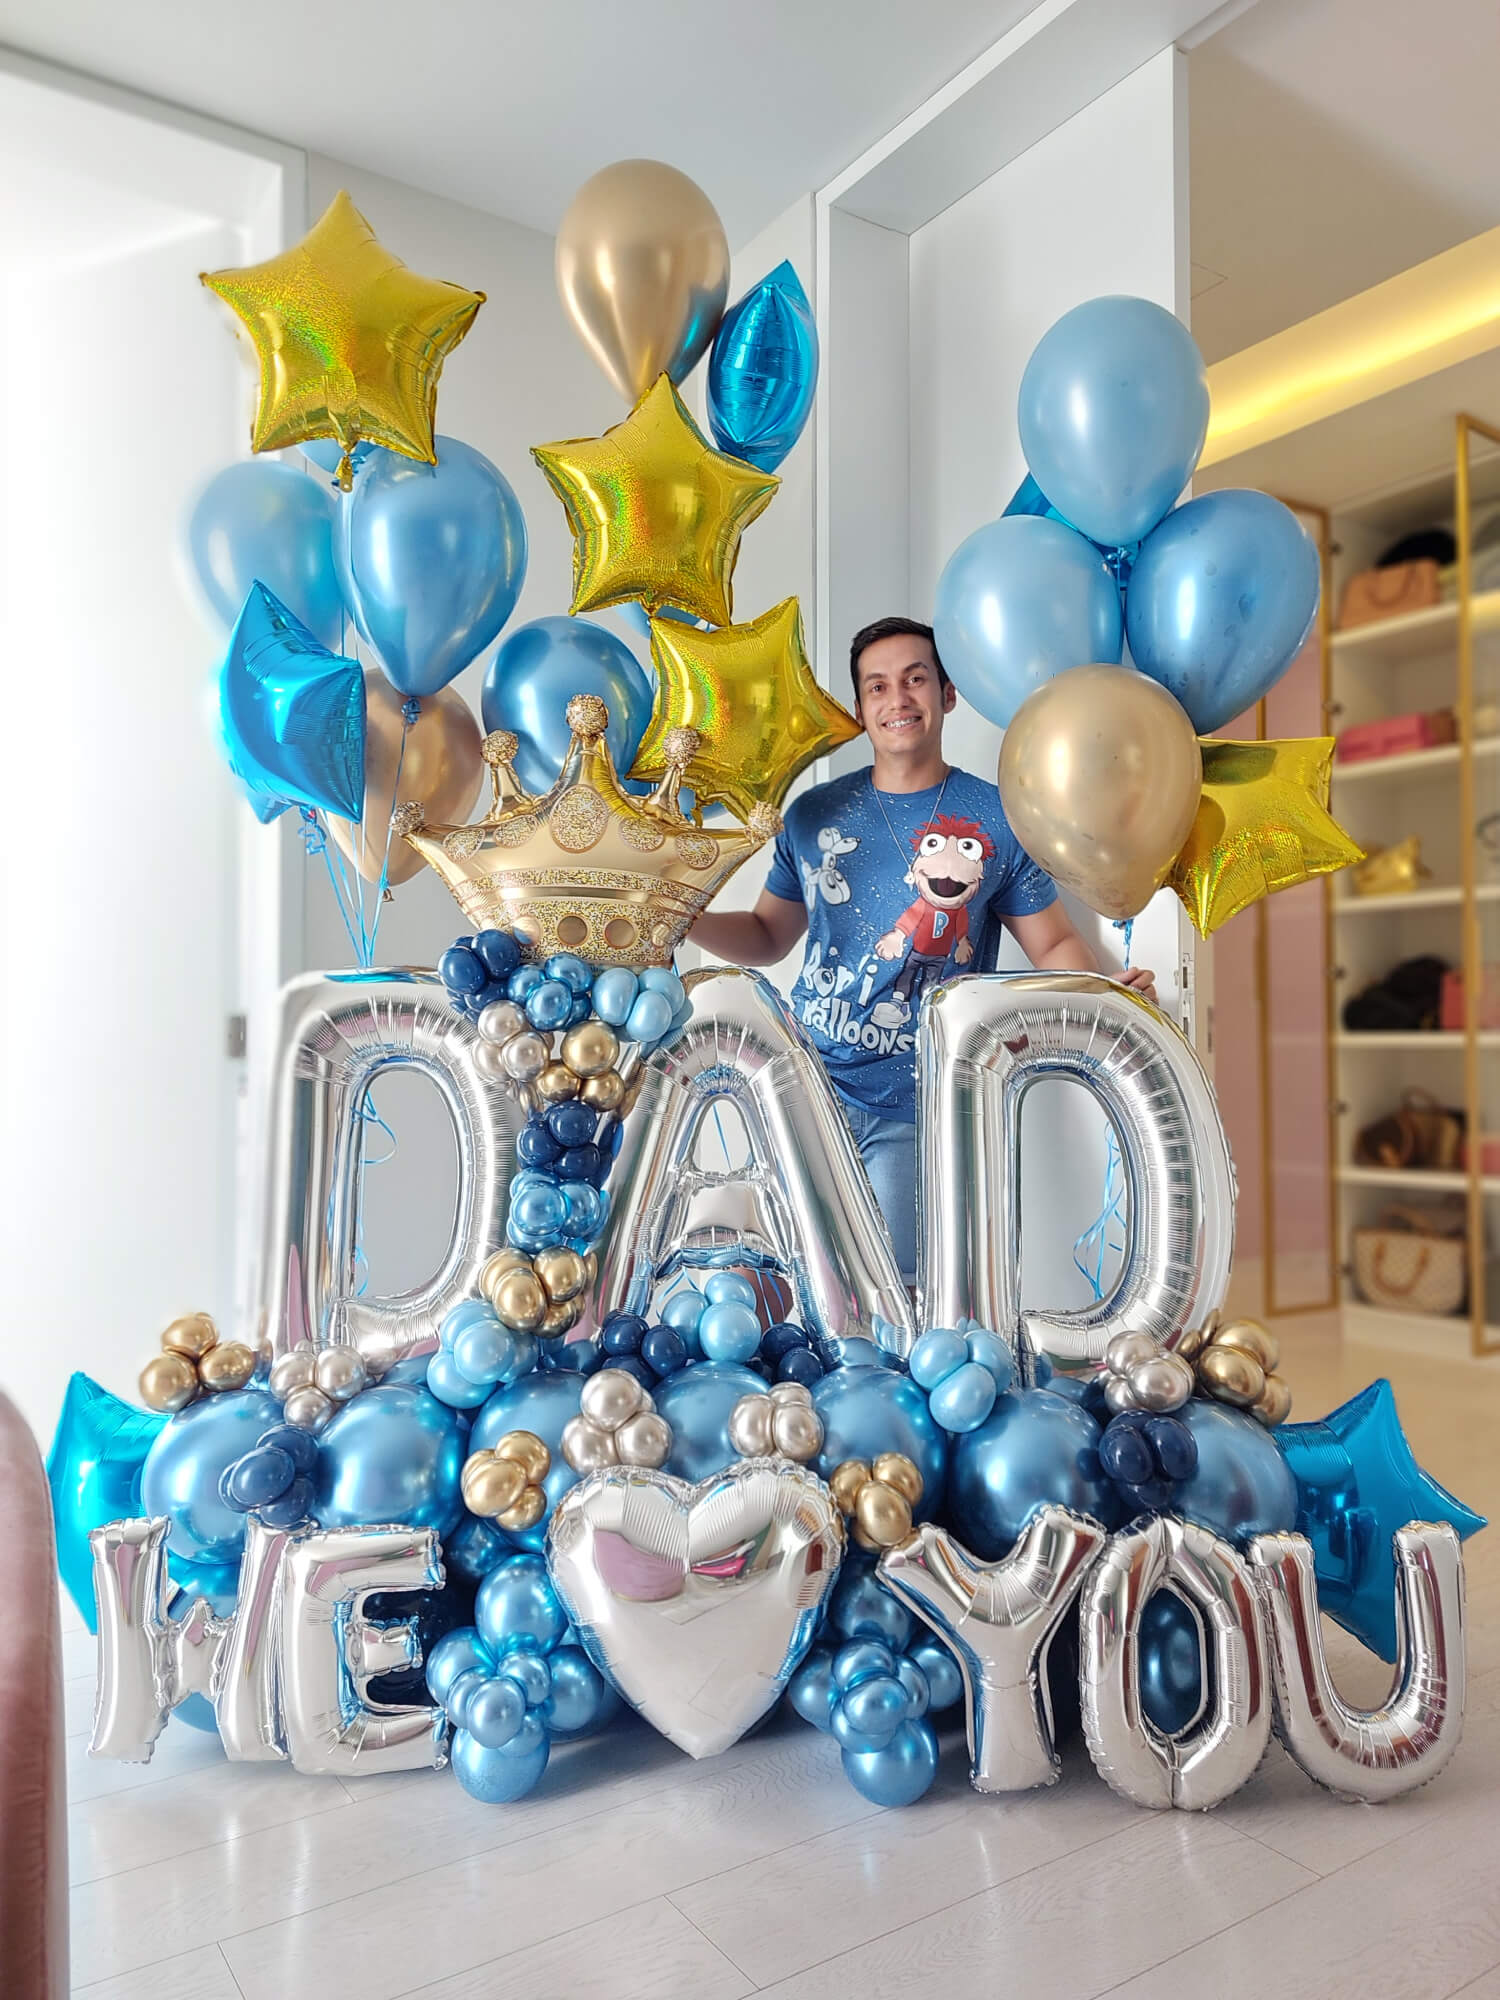 Balloon Bouquet "Dad We ♥ You"